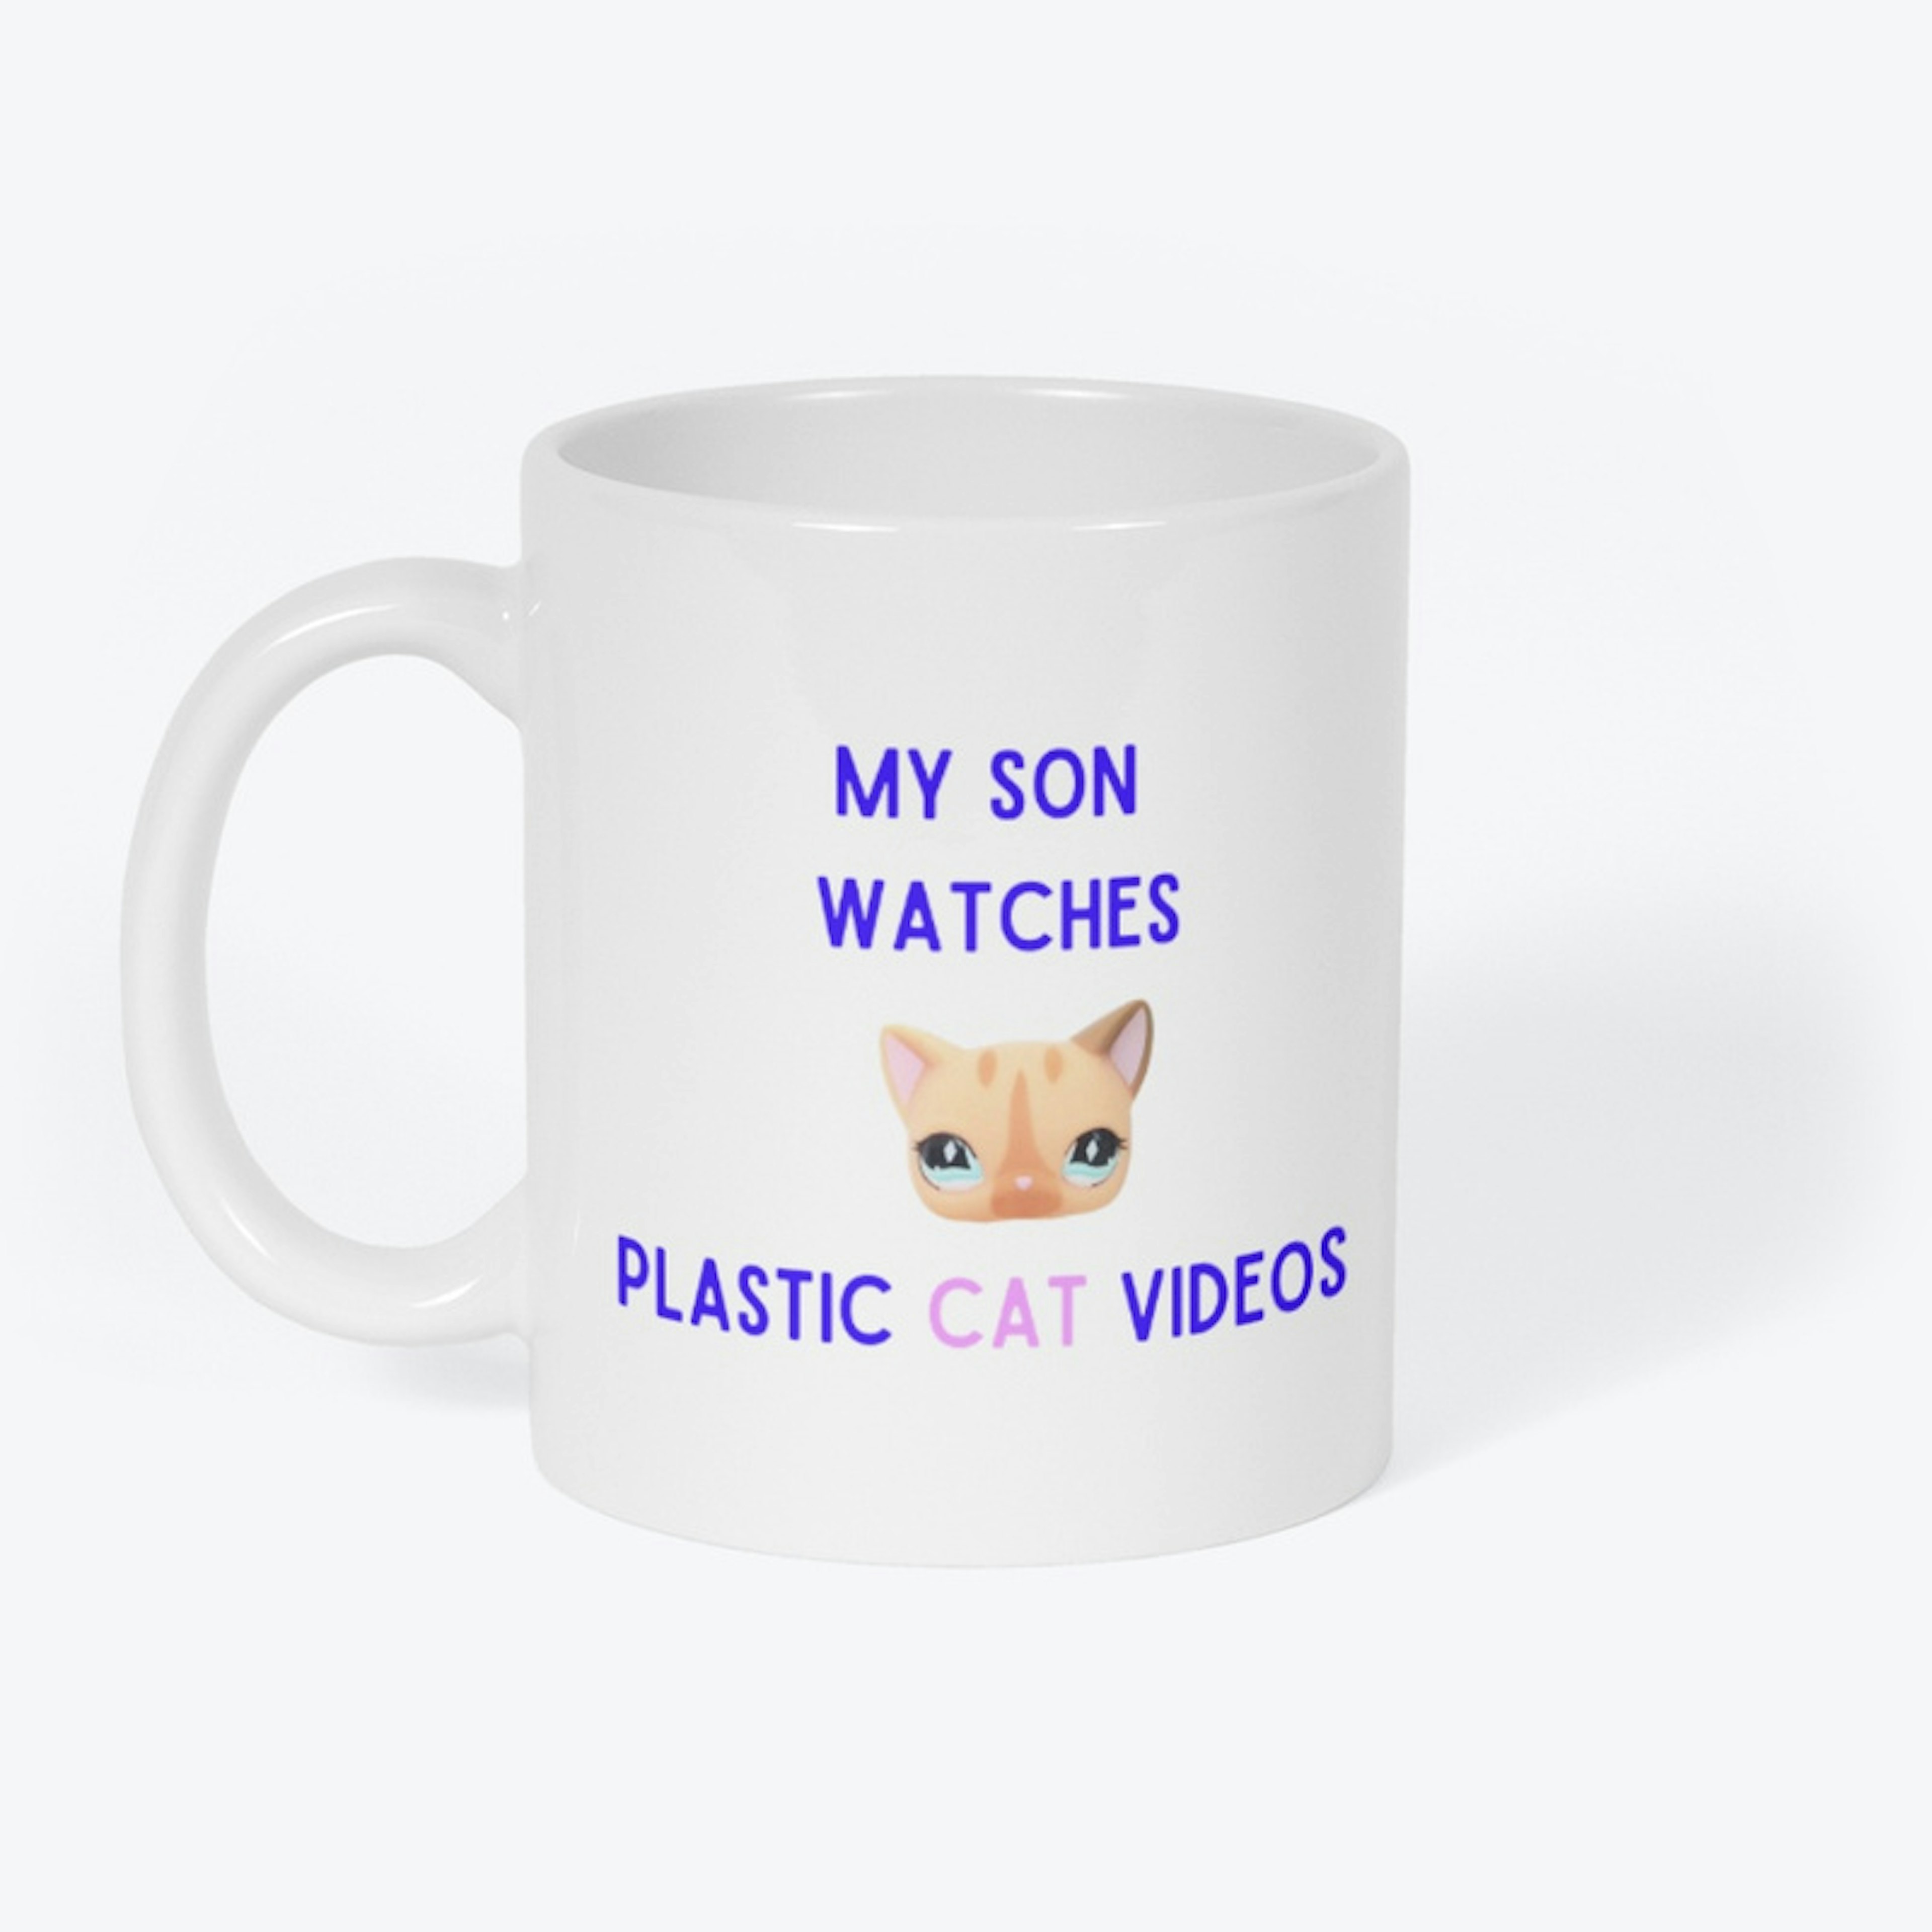 My Son Watches Plastic Cat Videos 